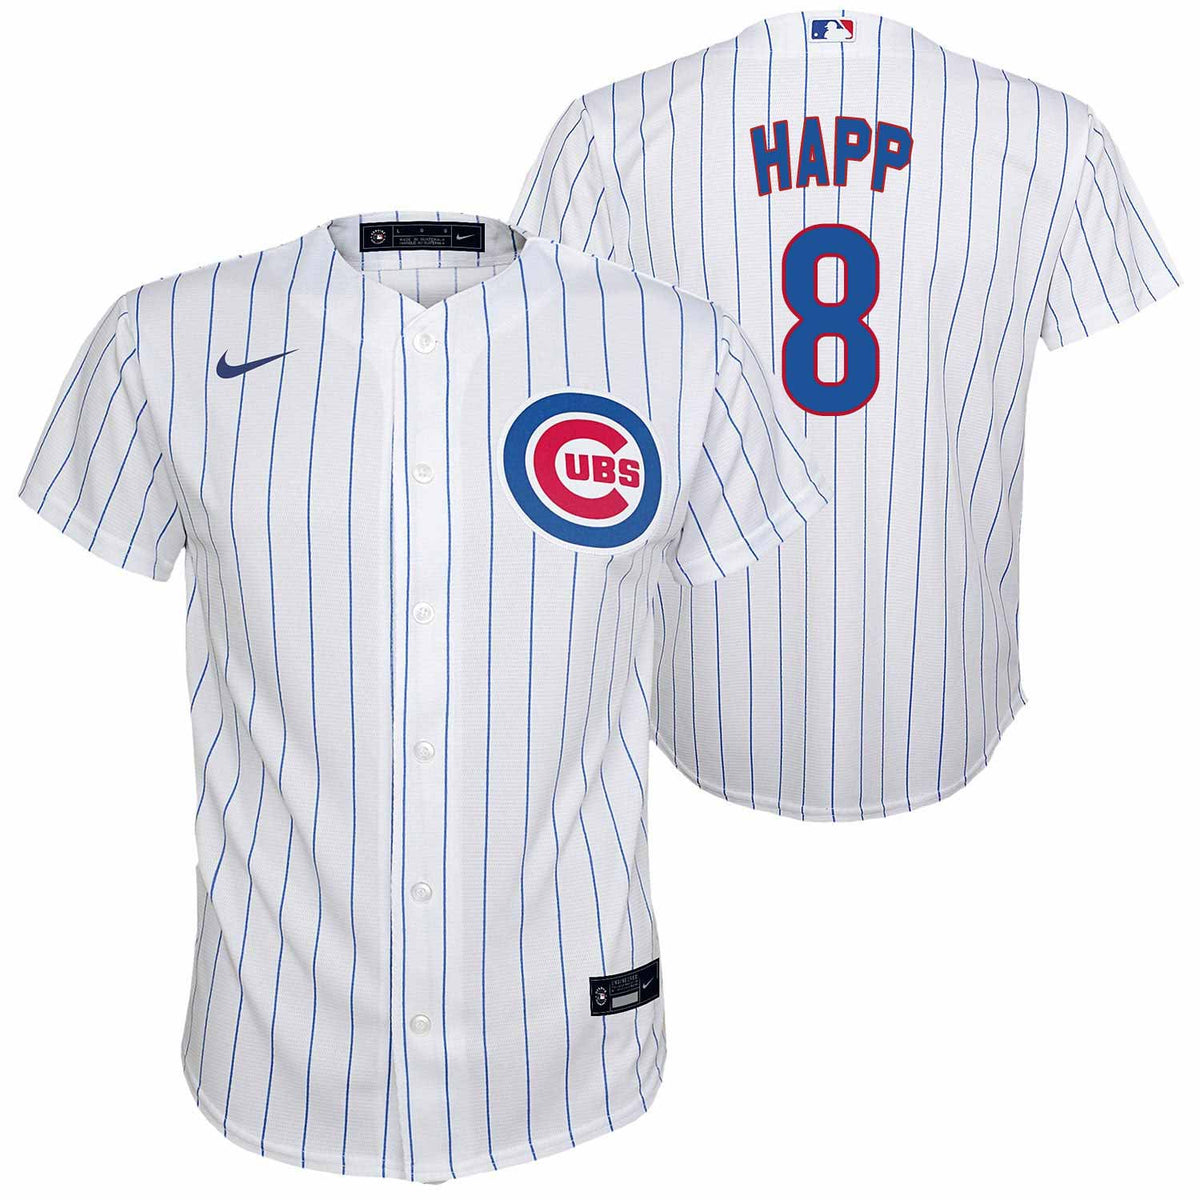 Chicago Cubs Customized Youth Nike Alternate Royal Team Replica Jersey Large = 14-16